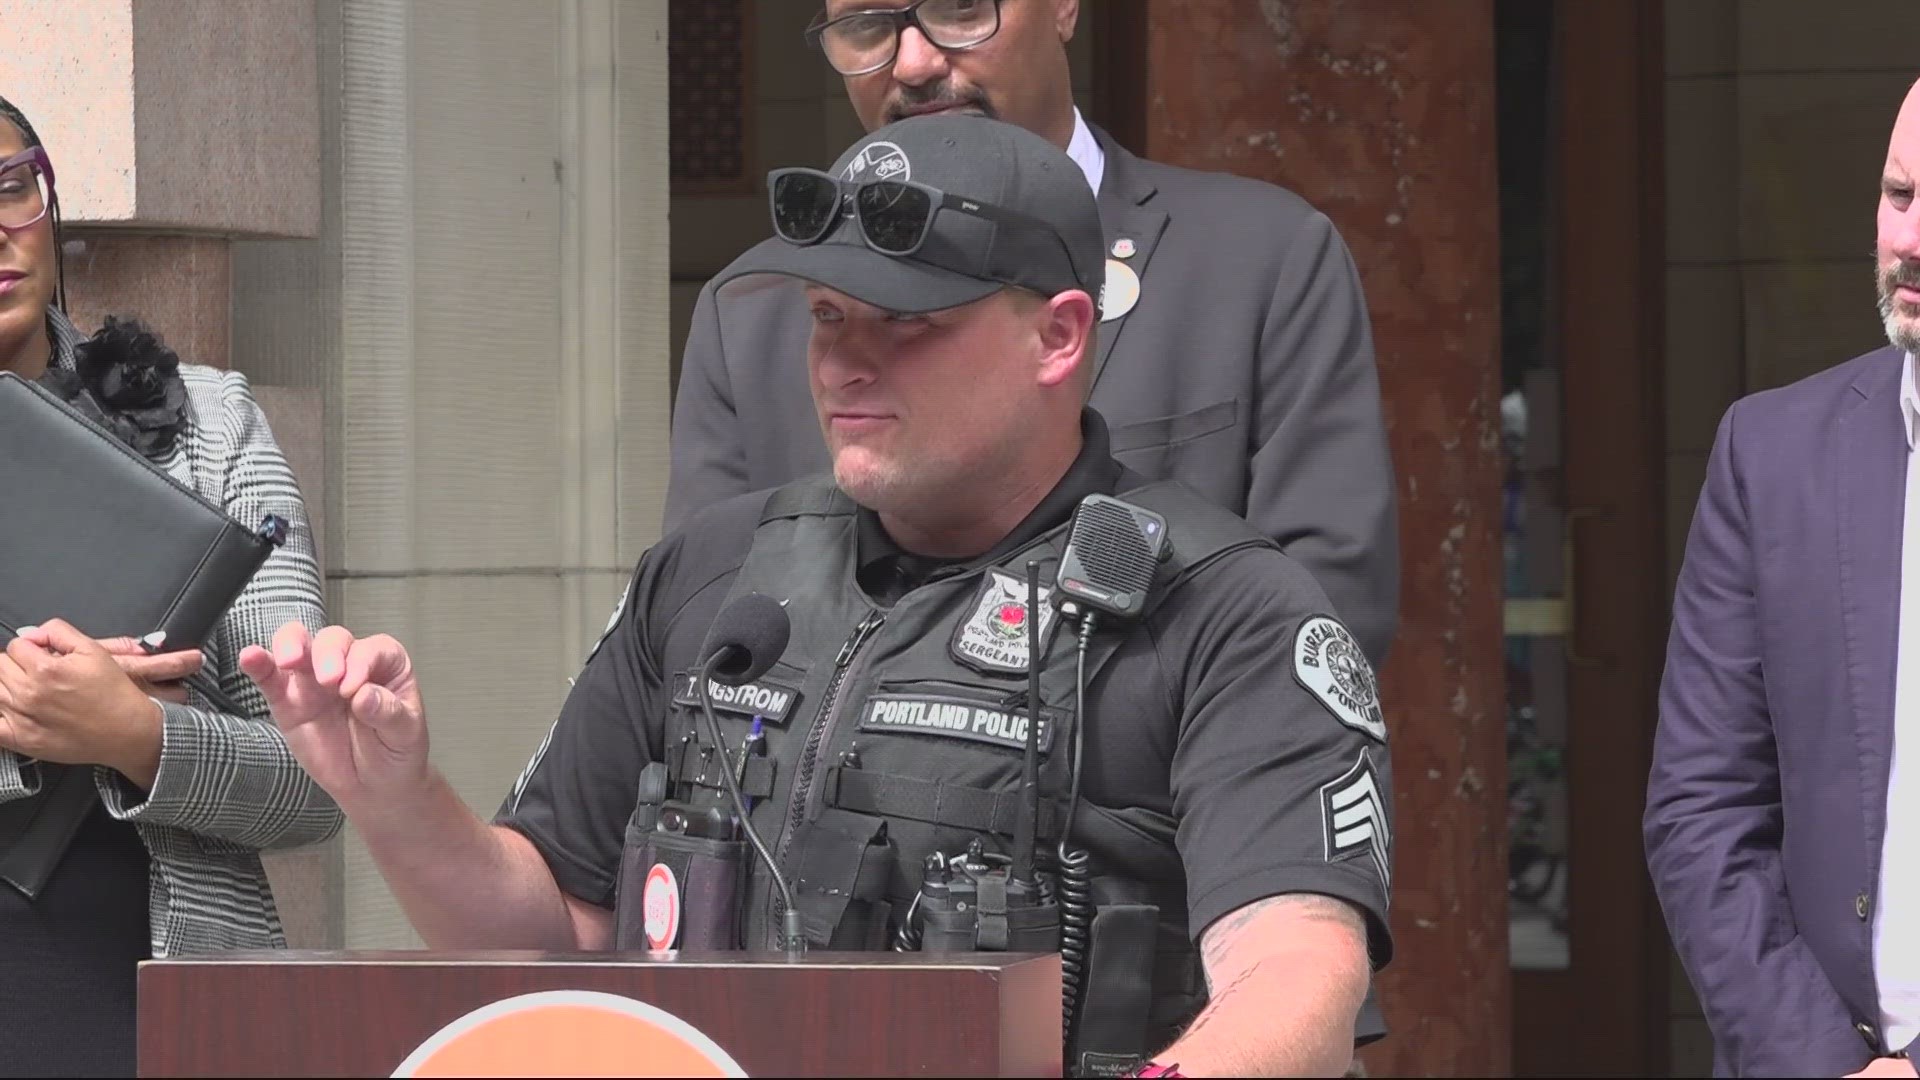 Transportation and public health leaders held a news conference Monday to discuss a deadly trend on Portland's streets, with 44 traffic deaths so far in 2023.